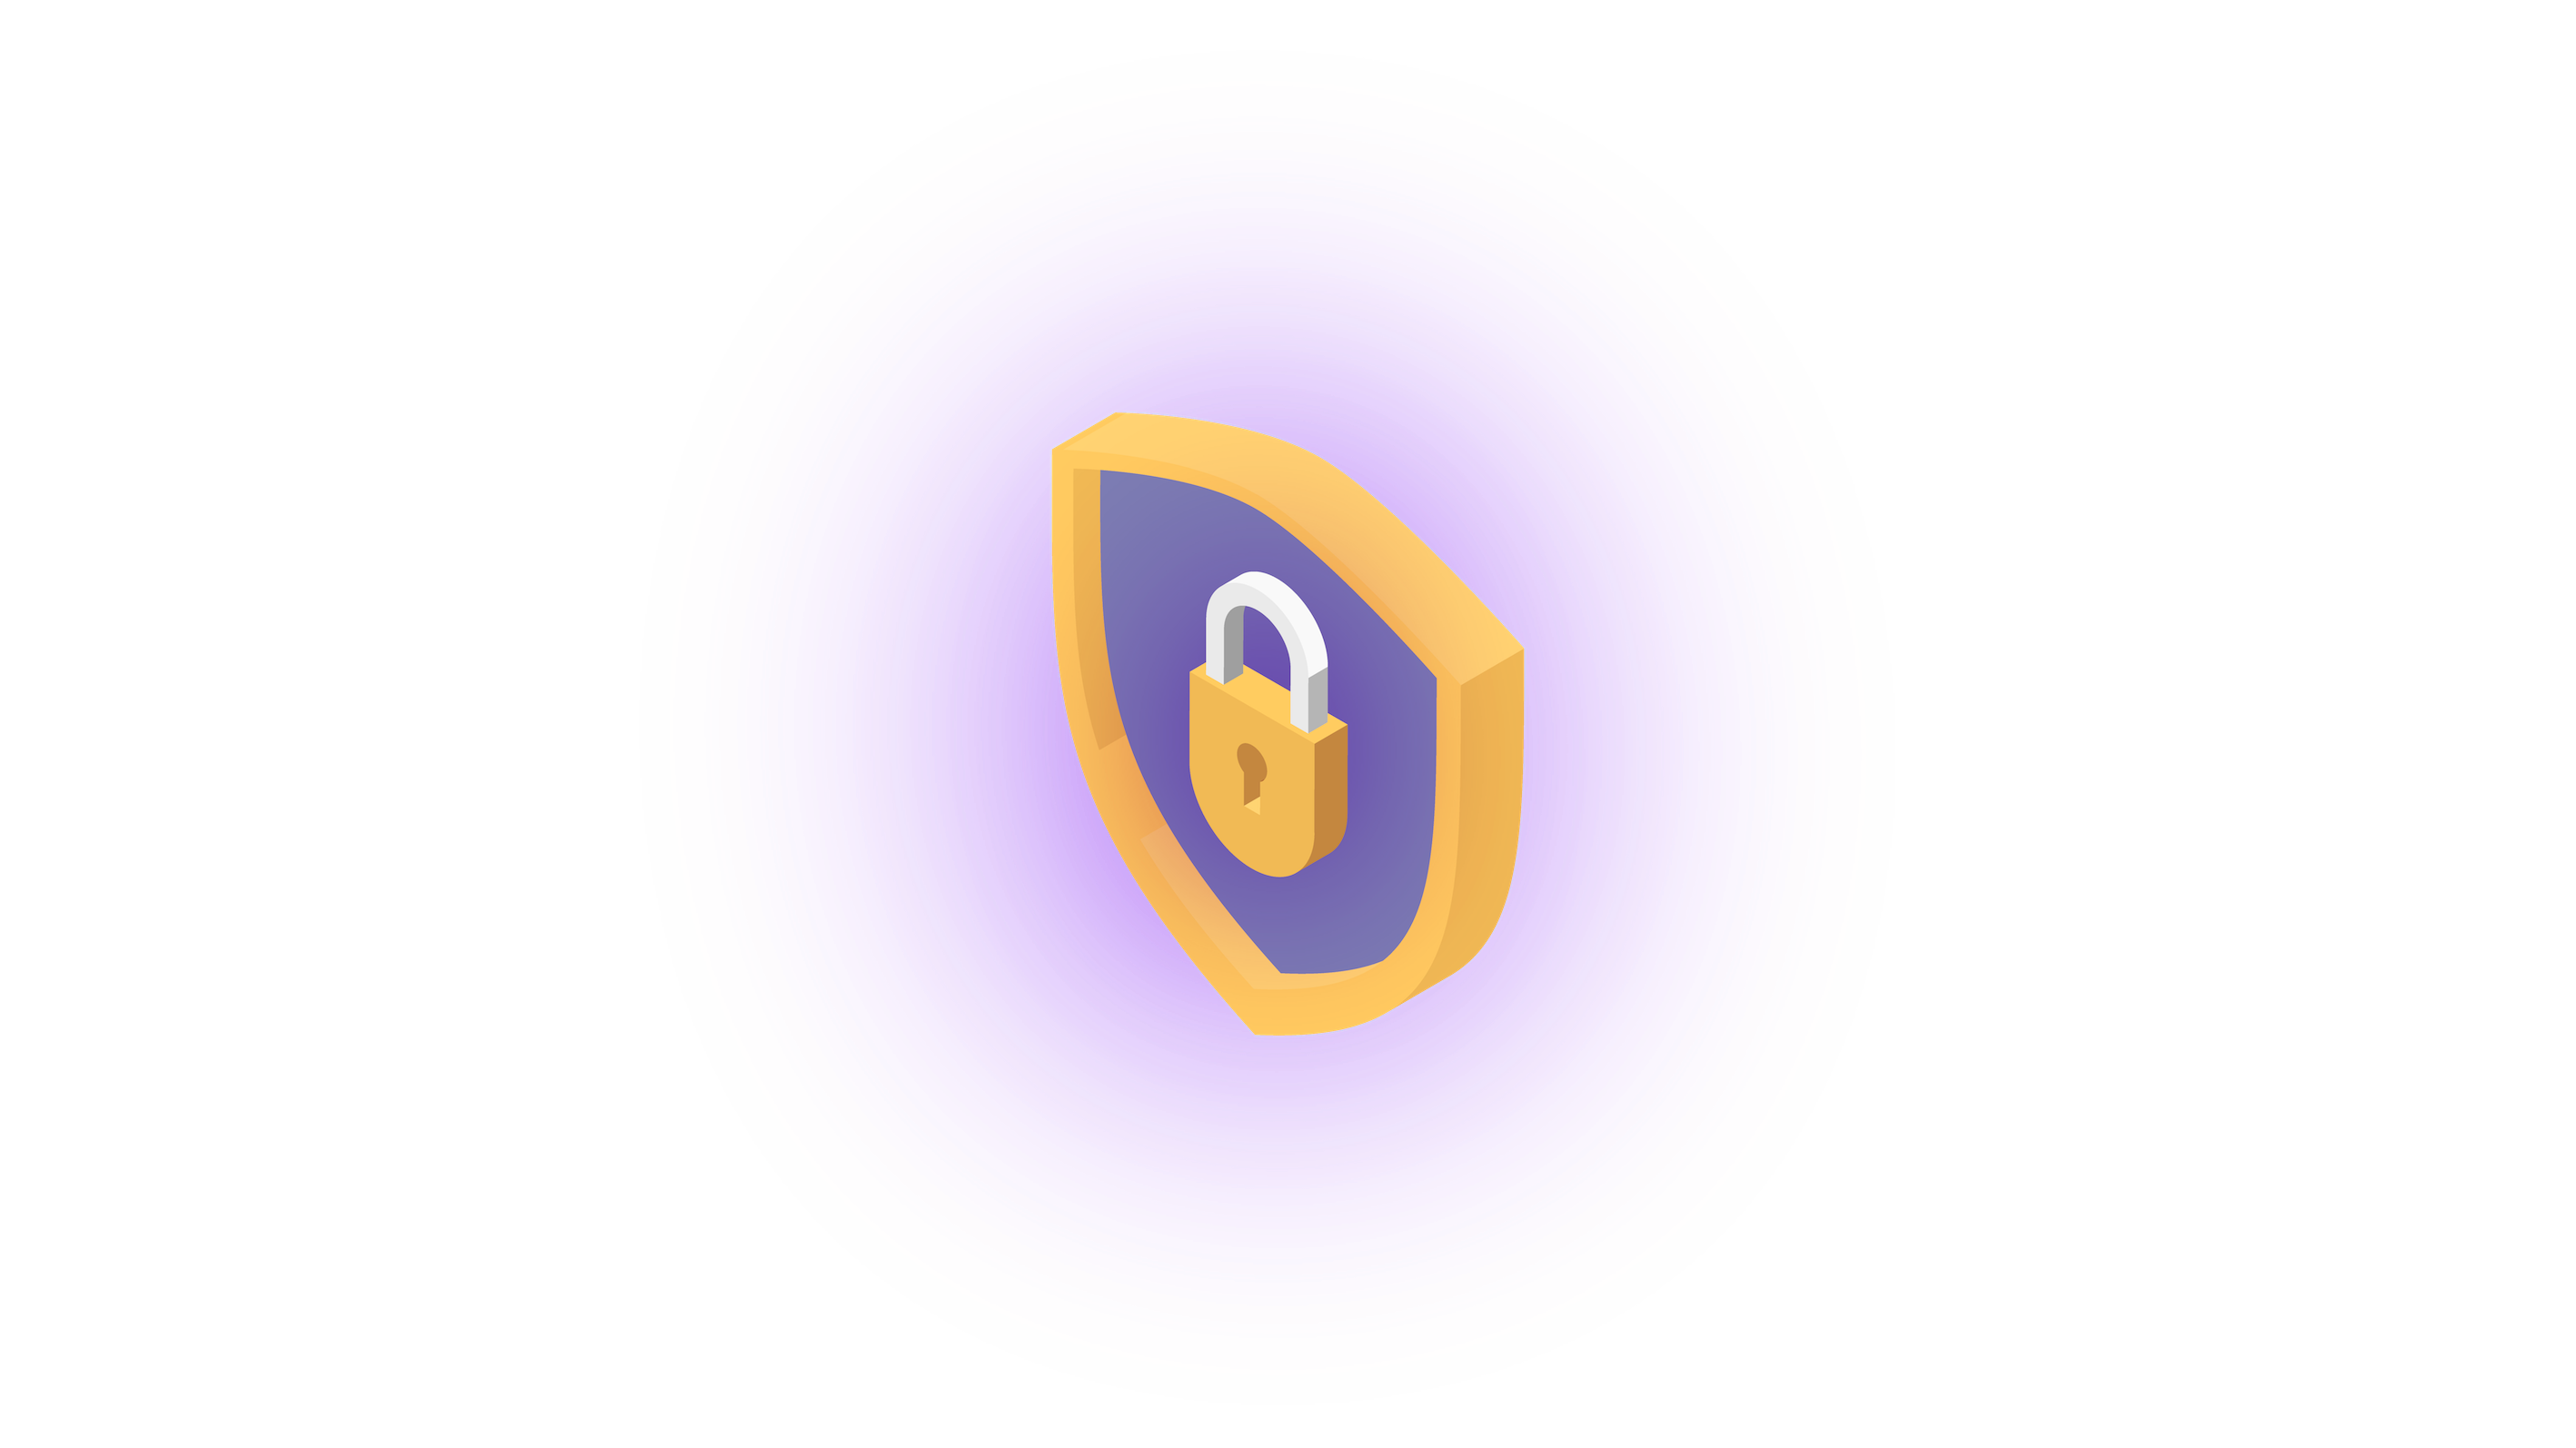 What security measures does Coinmetro offer?